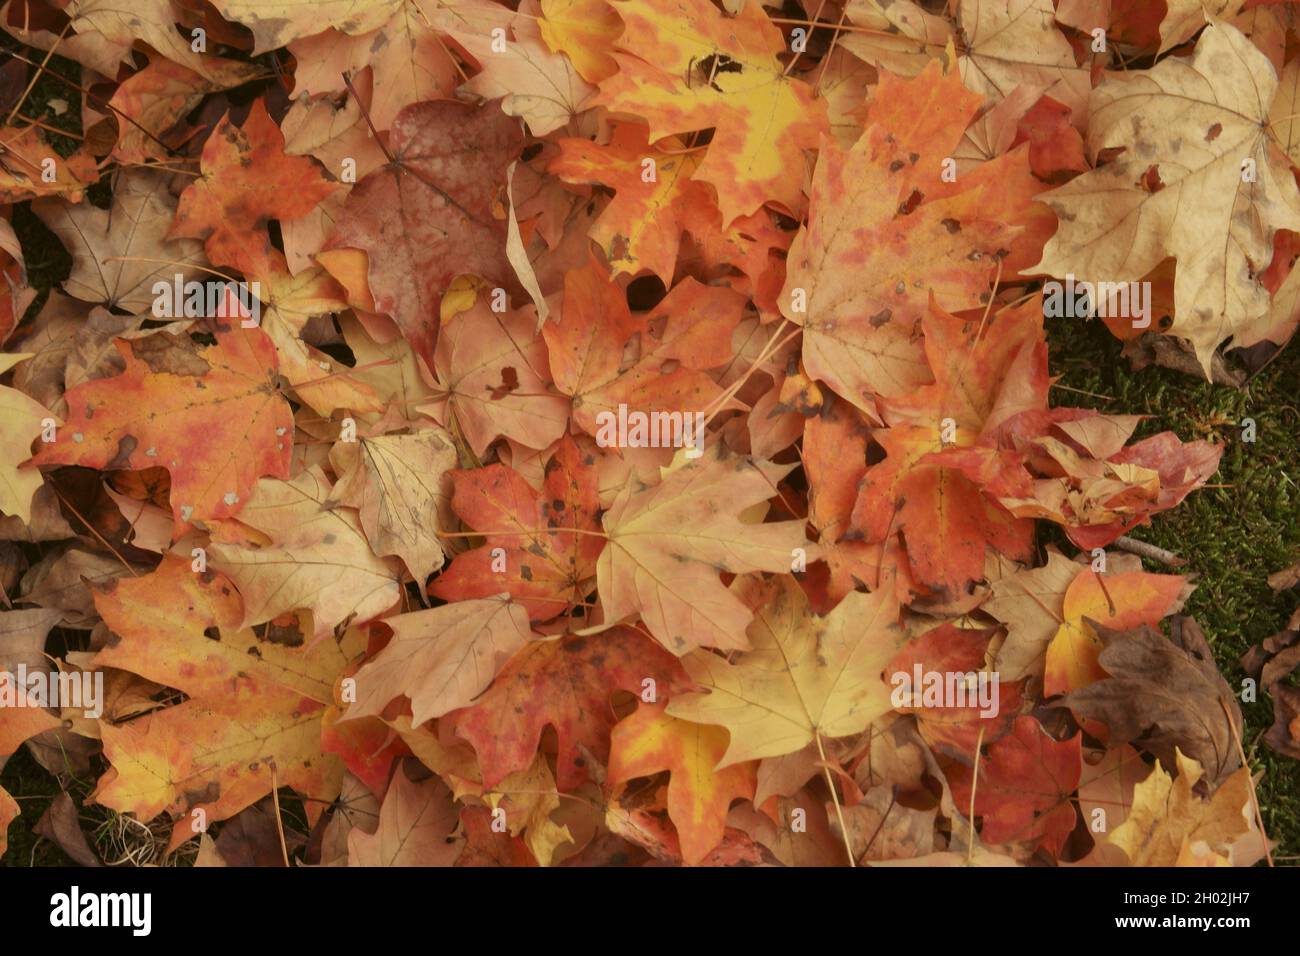 Golden yellow fall oak leaves on ground Stock Photo